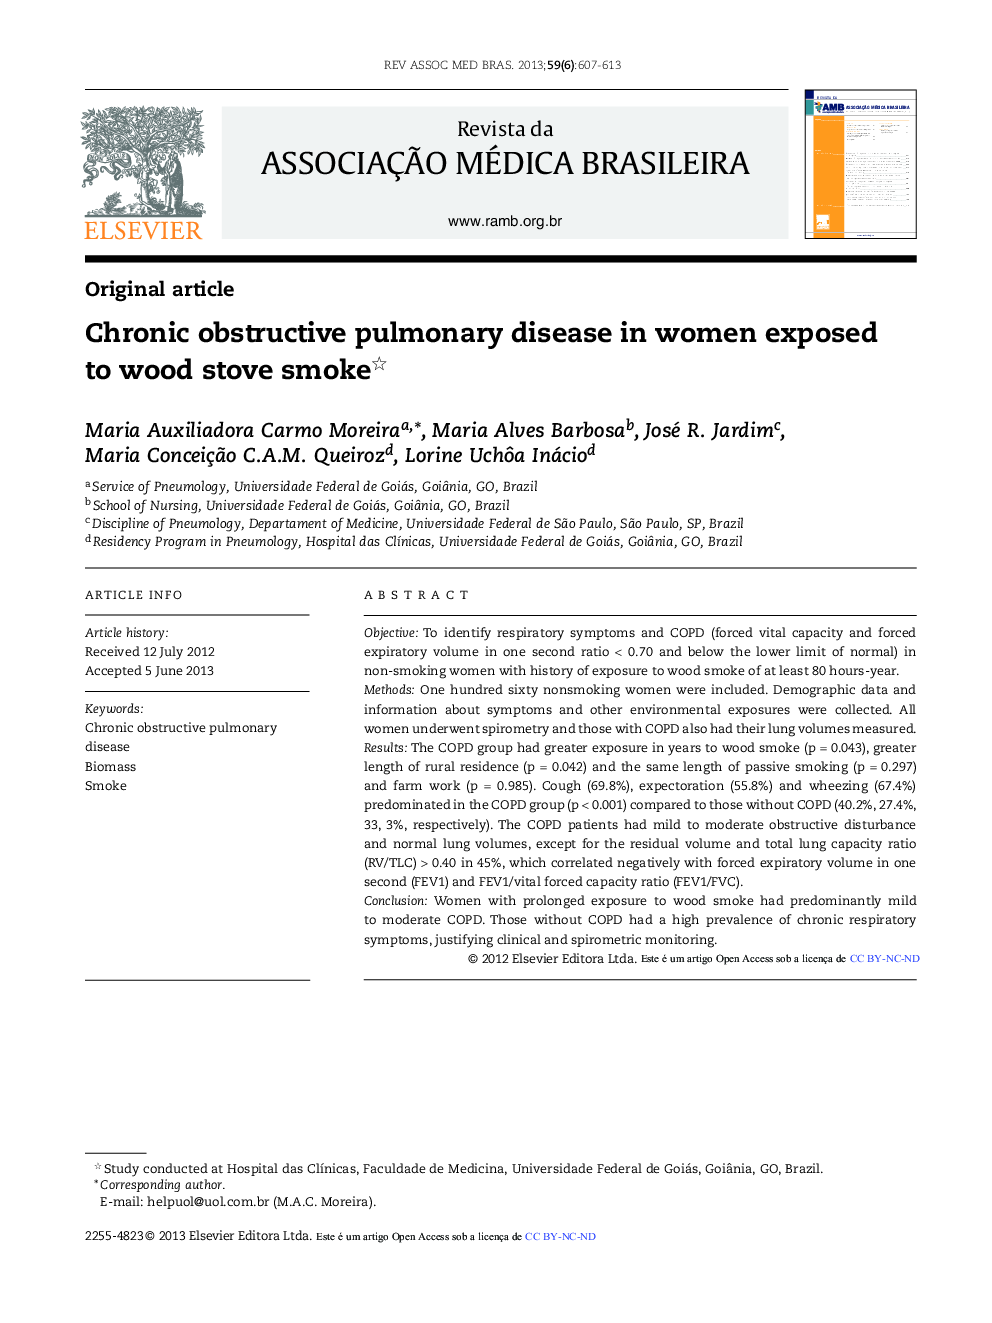 Chronic obstructive pulmonary disease in women exposed to wood stove smoke *